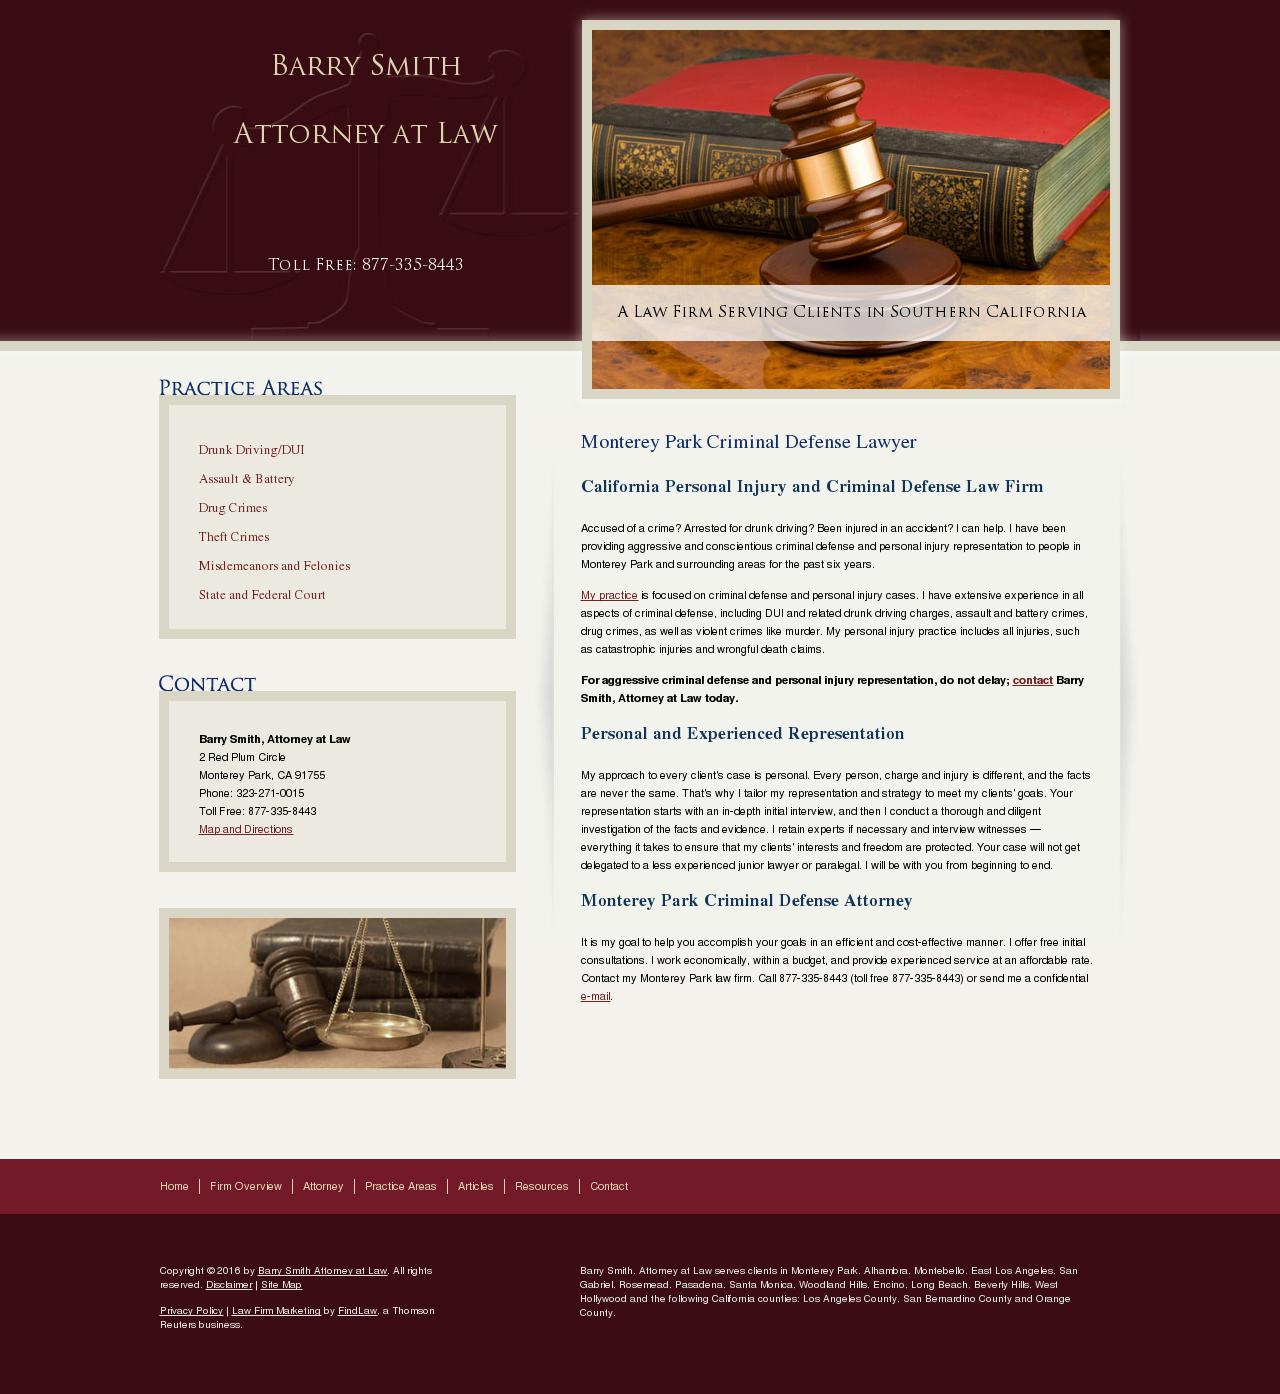 Barry Smith Attorney at Law - Monterey Park CA Lawyers